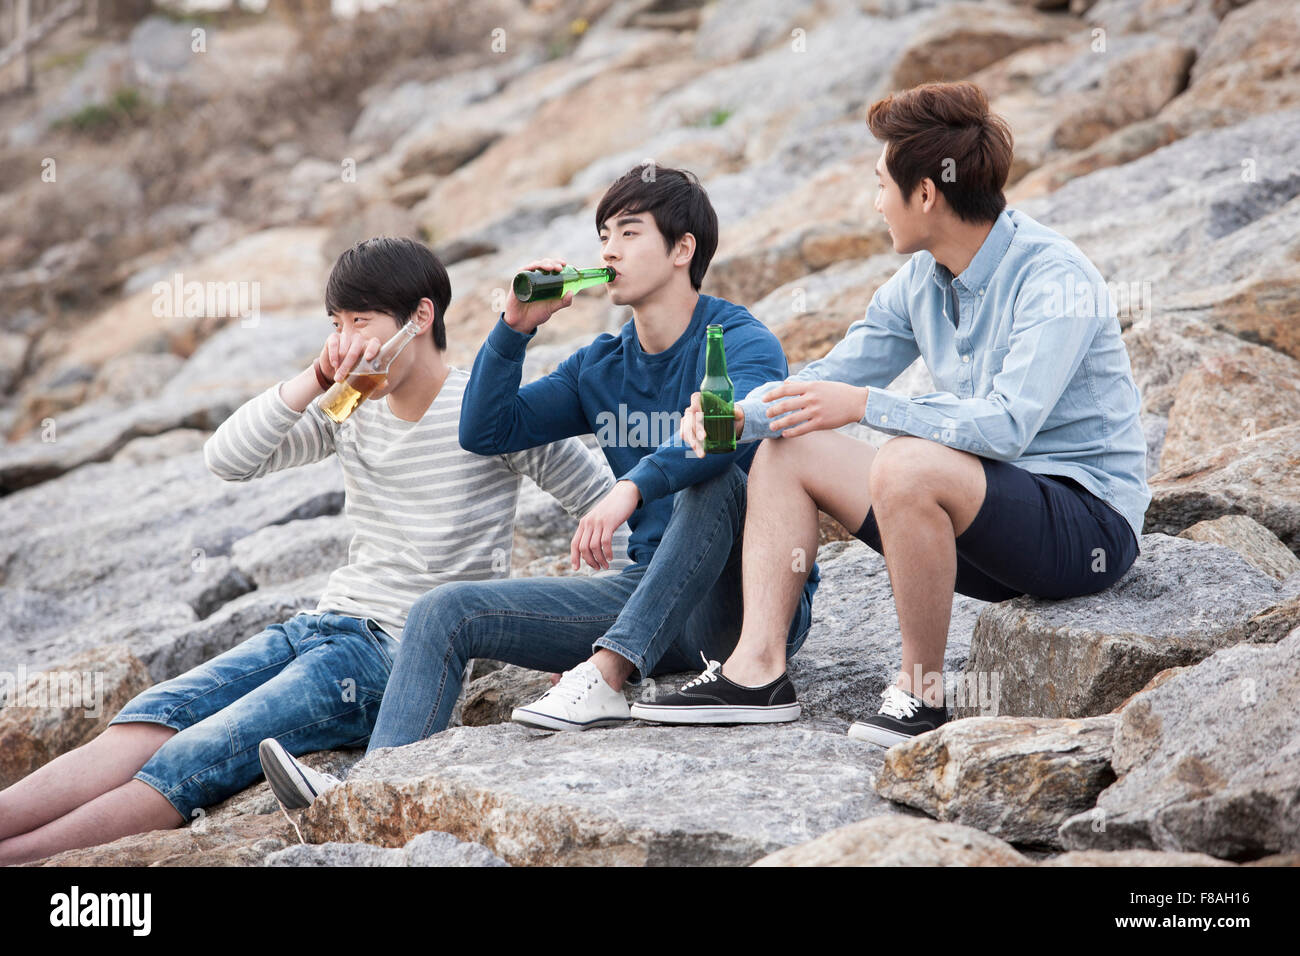 Three young men sitting on rocks and drinking beer Stock Photo